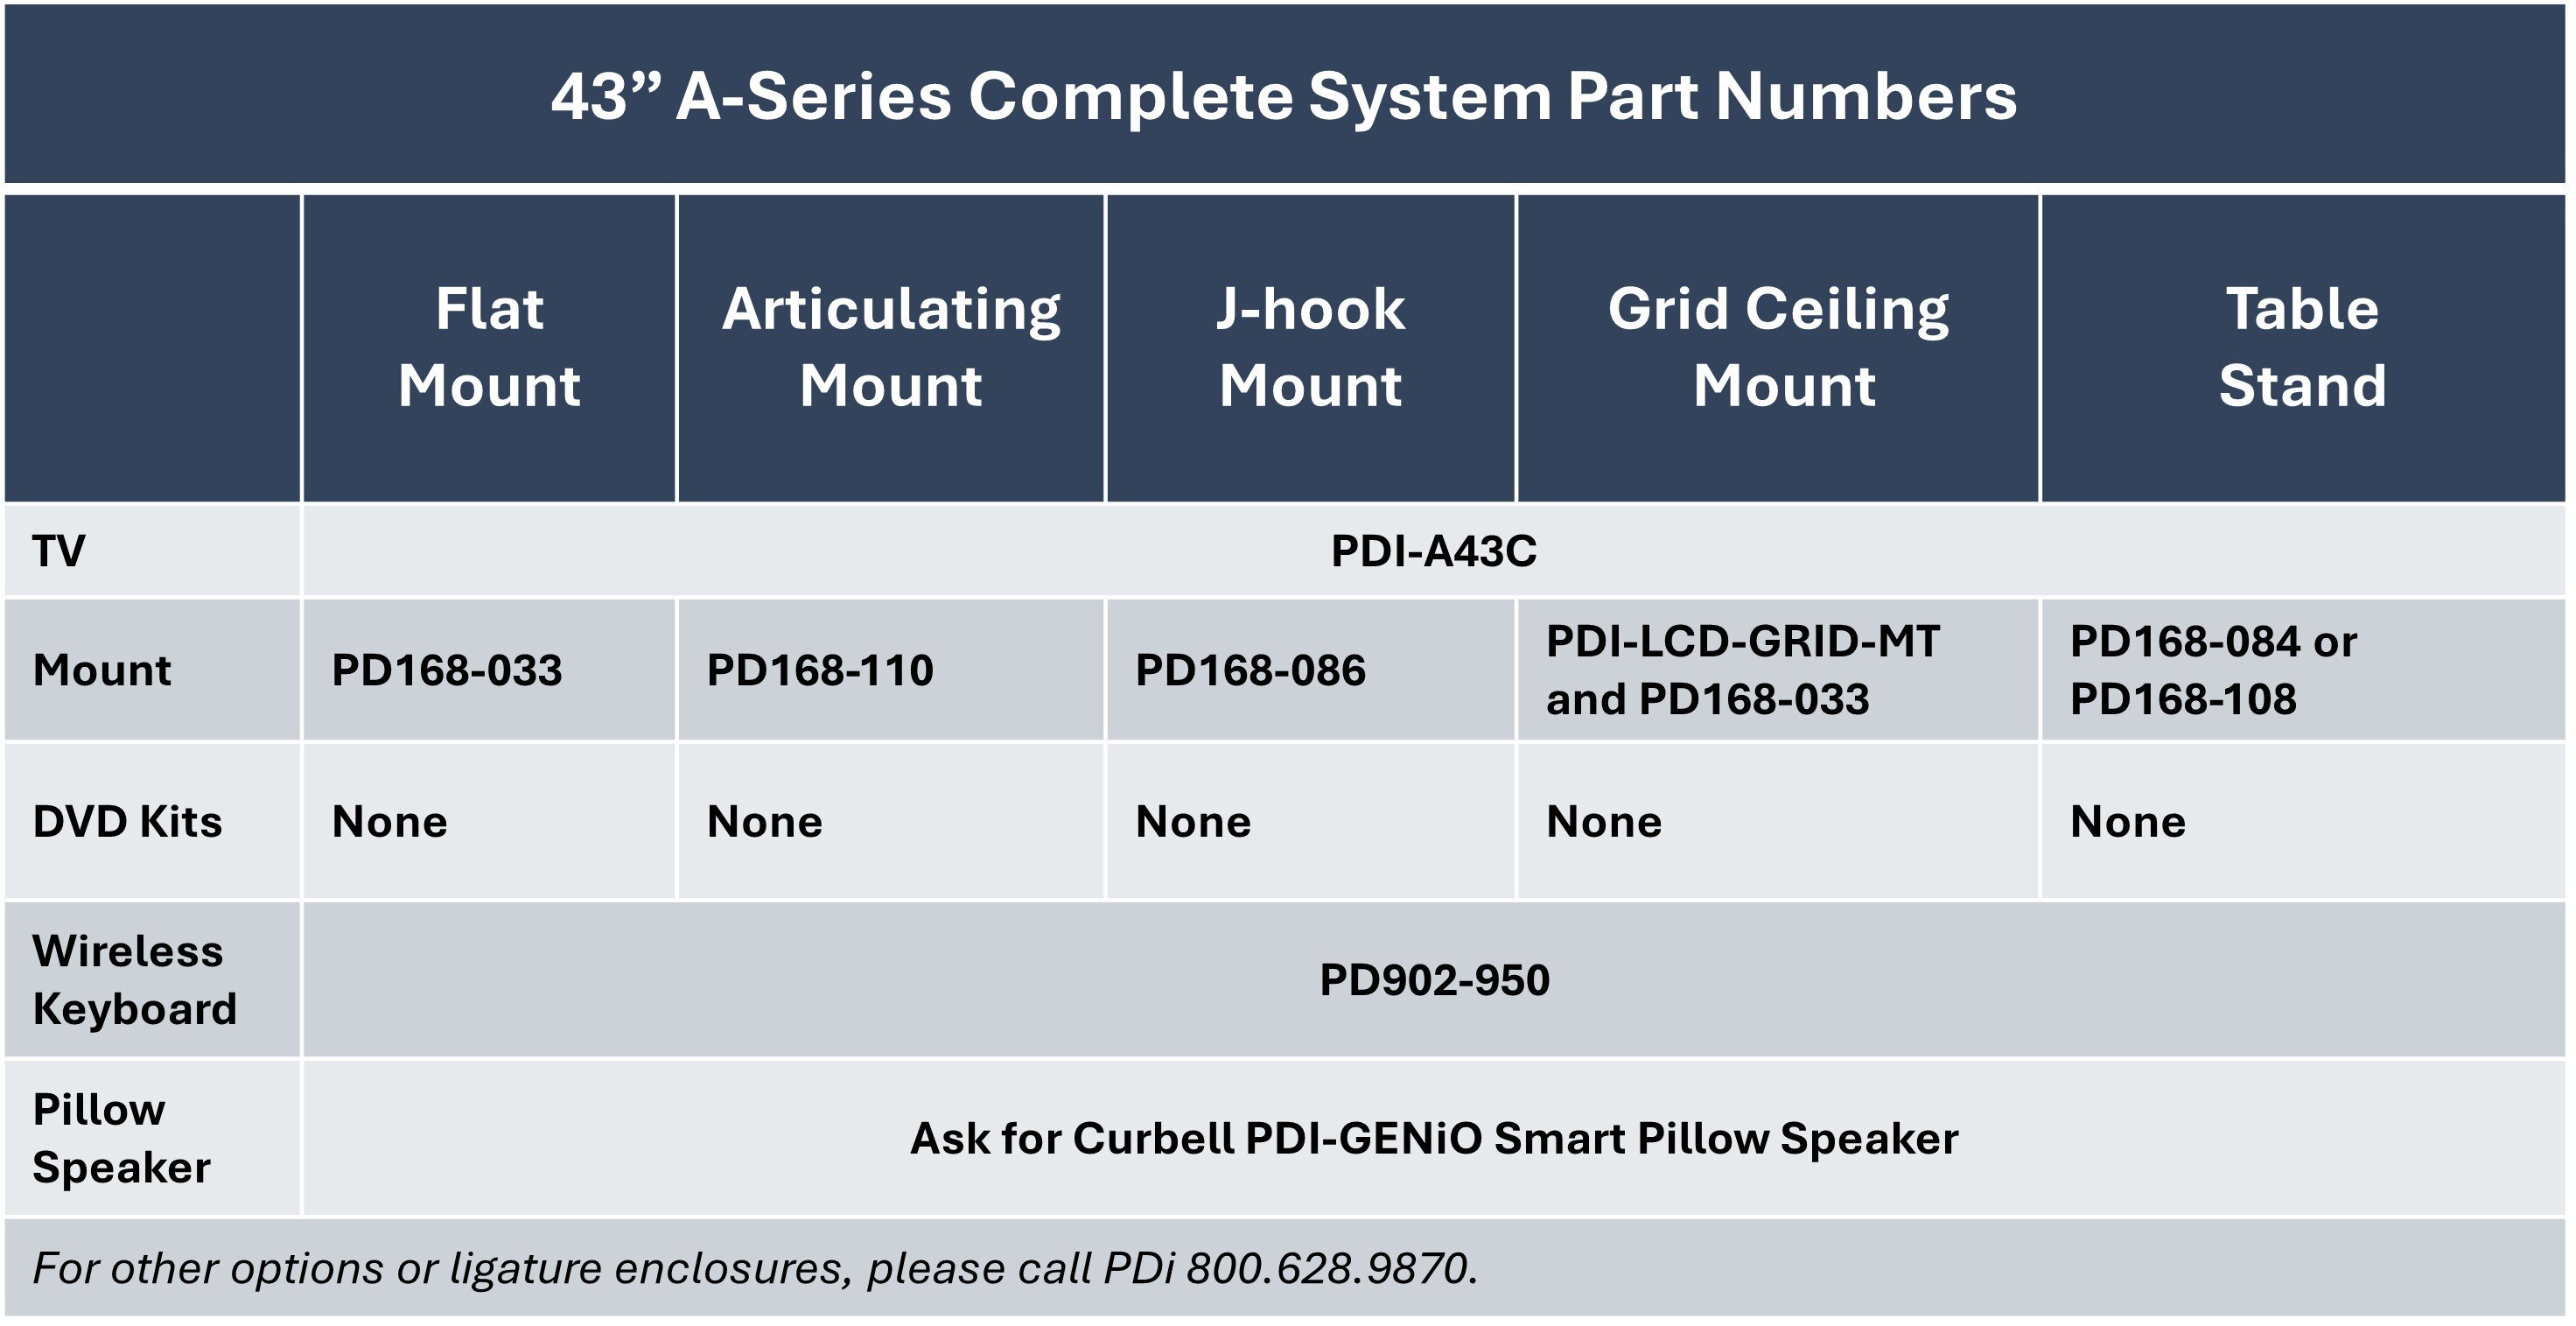 PDi Part Numbers for Complete 43